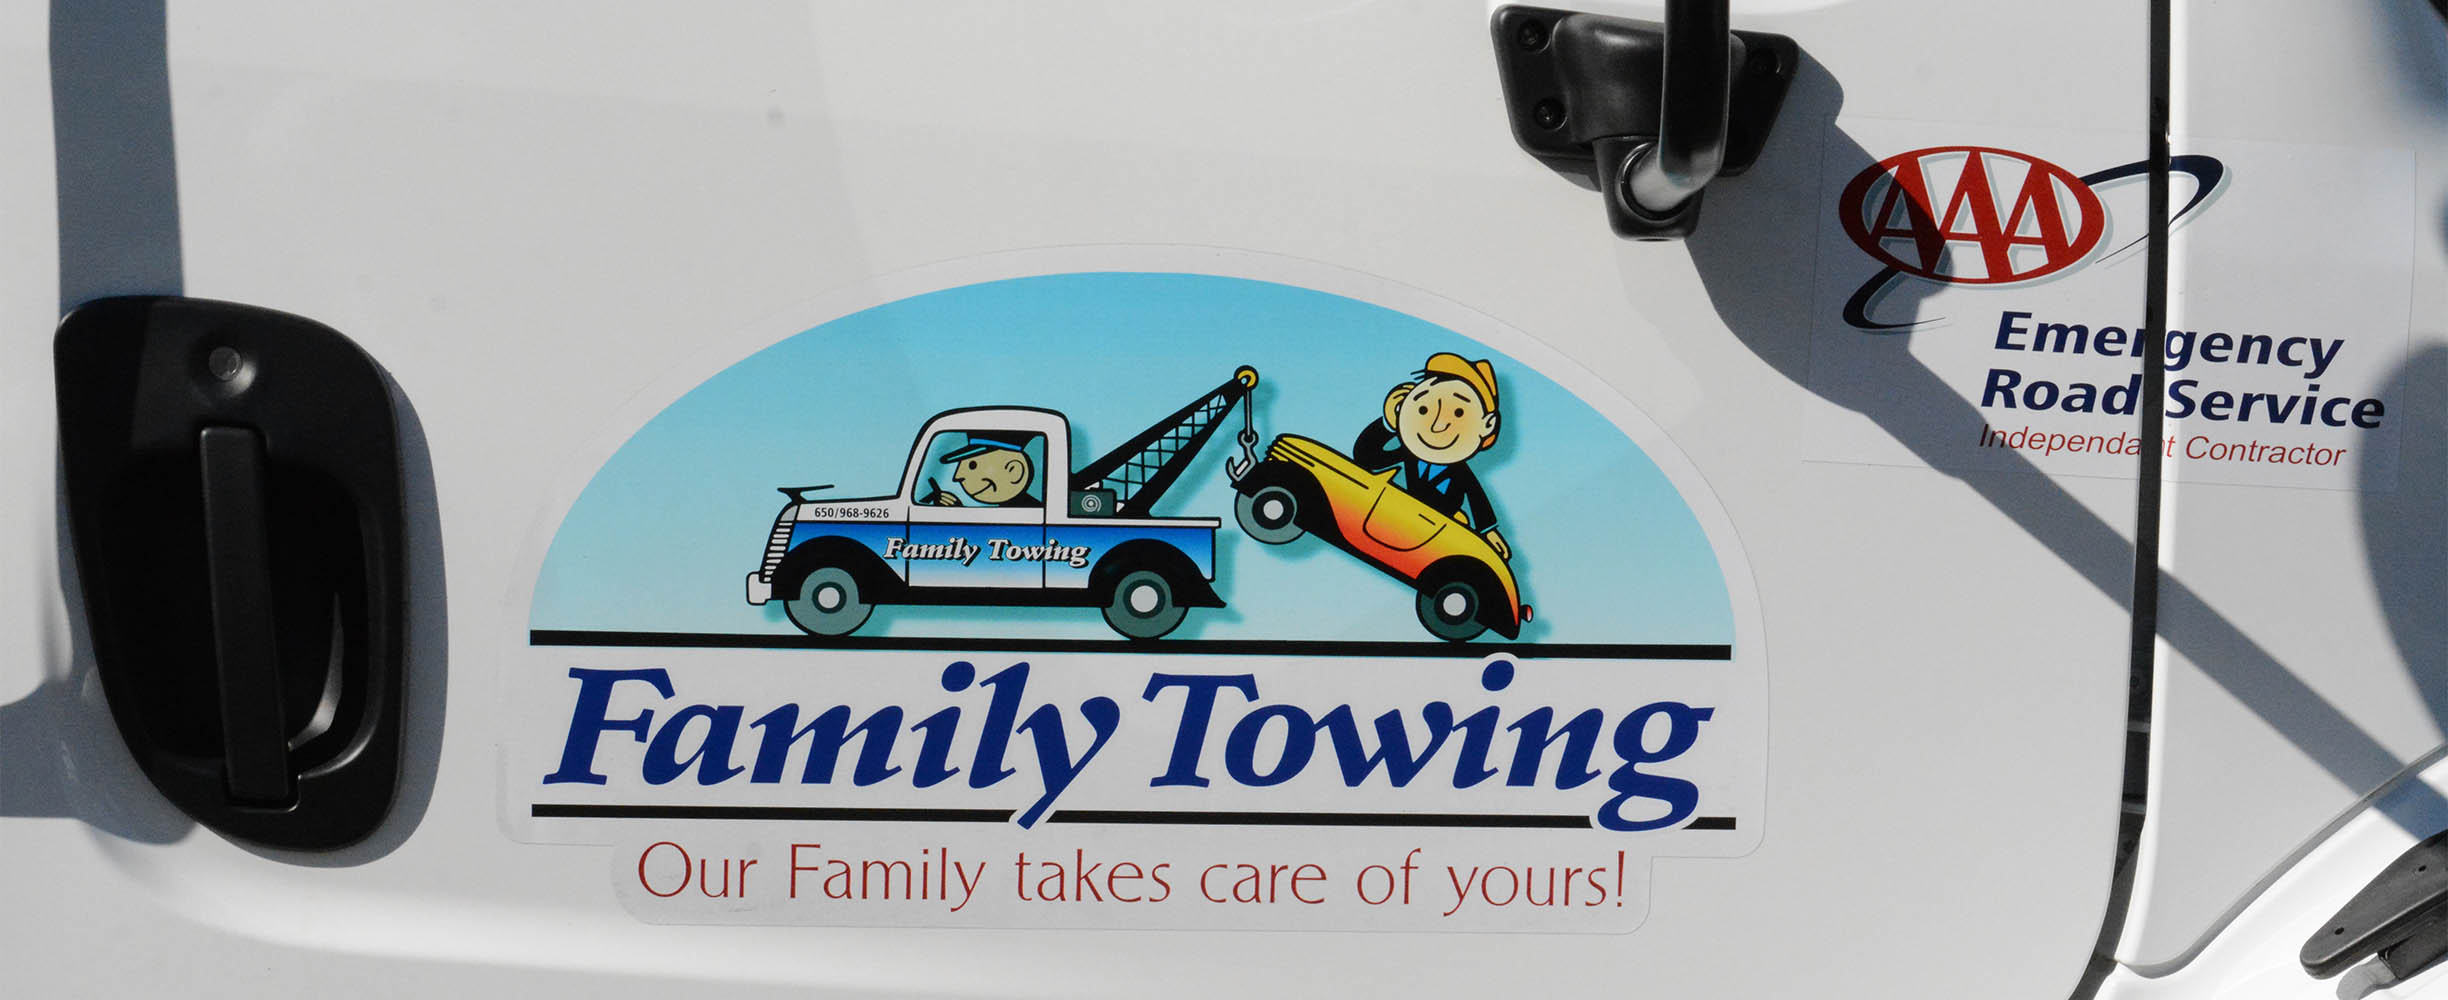 Family Towing is a famiy owned company offering all types of towing and transpotation services in Moumntain Viewe and the San Francisco Peninsula